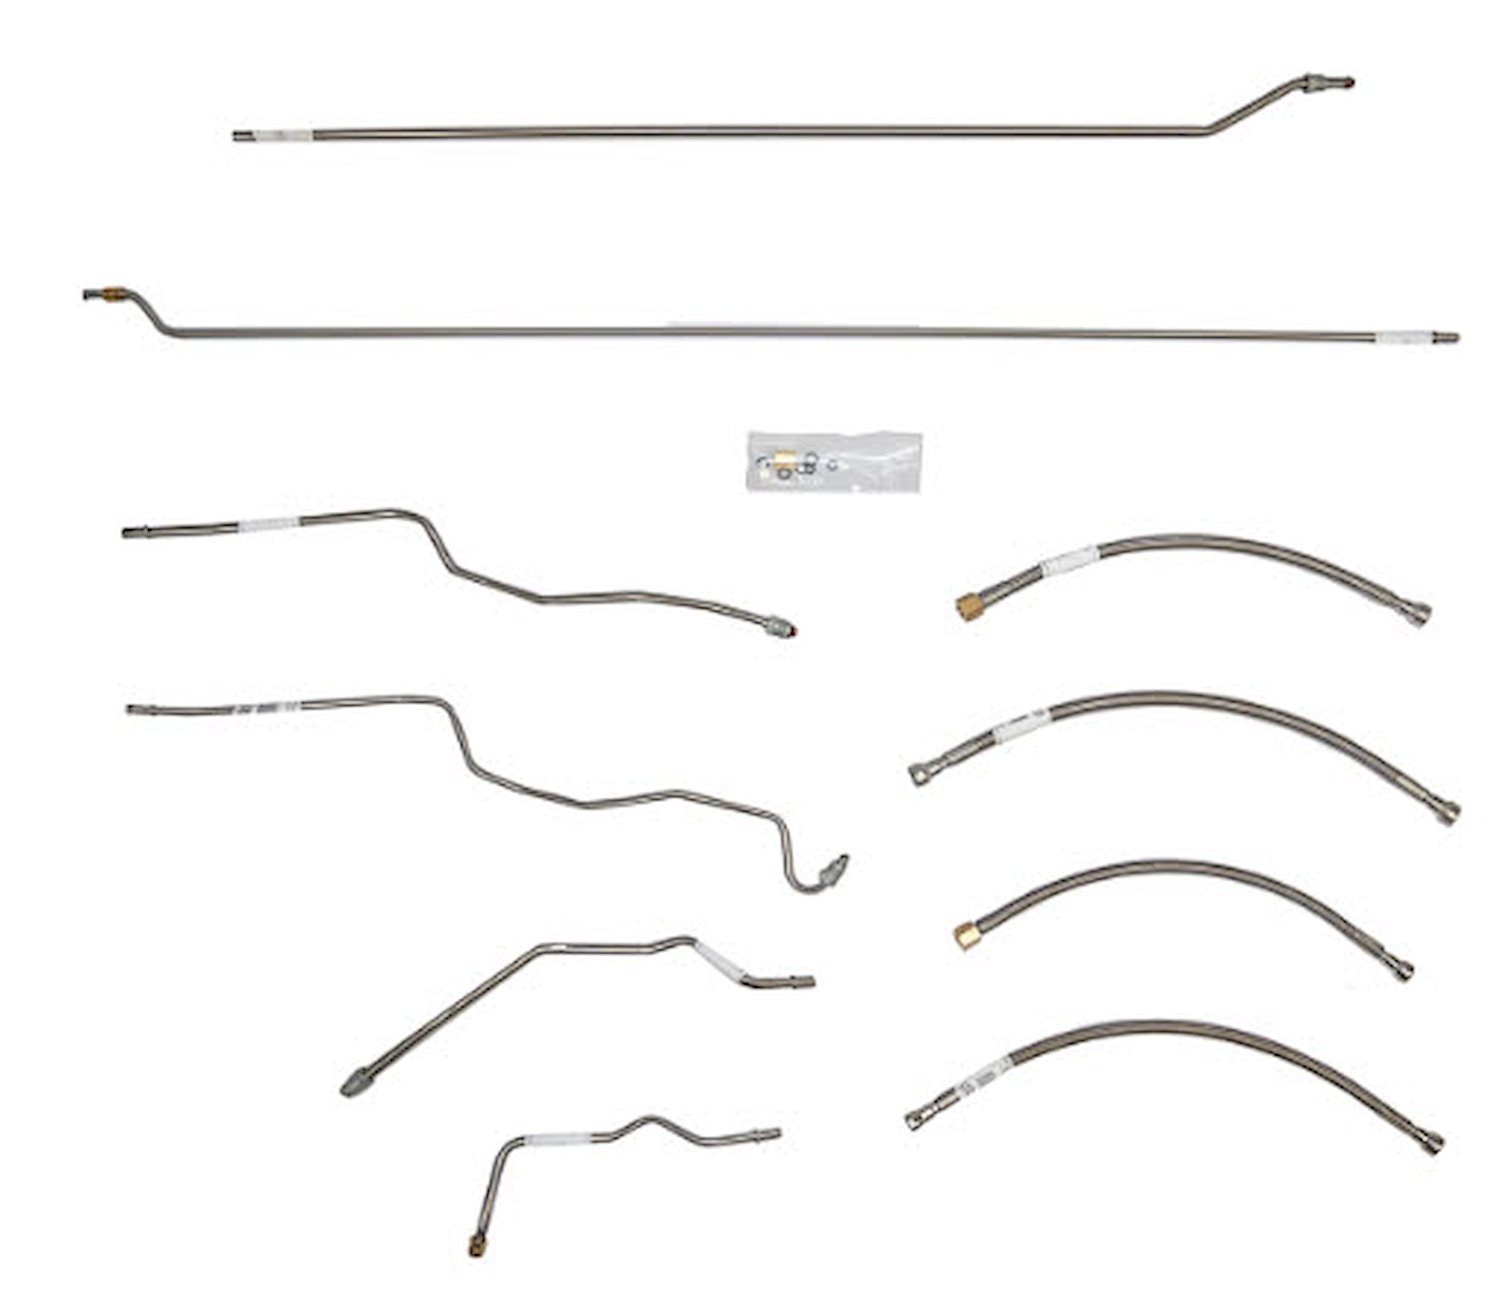 JEGS Fuel Line Kit - Complete Fuel Line Kit for 1988-1995 Chevy K1500, GMC  K1500 4WD - JEGS